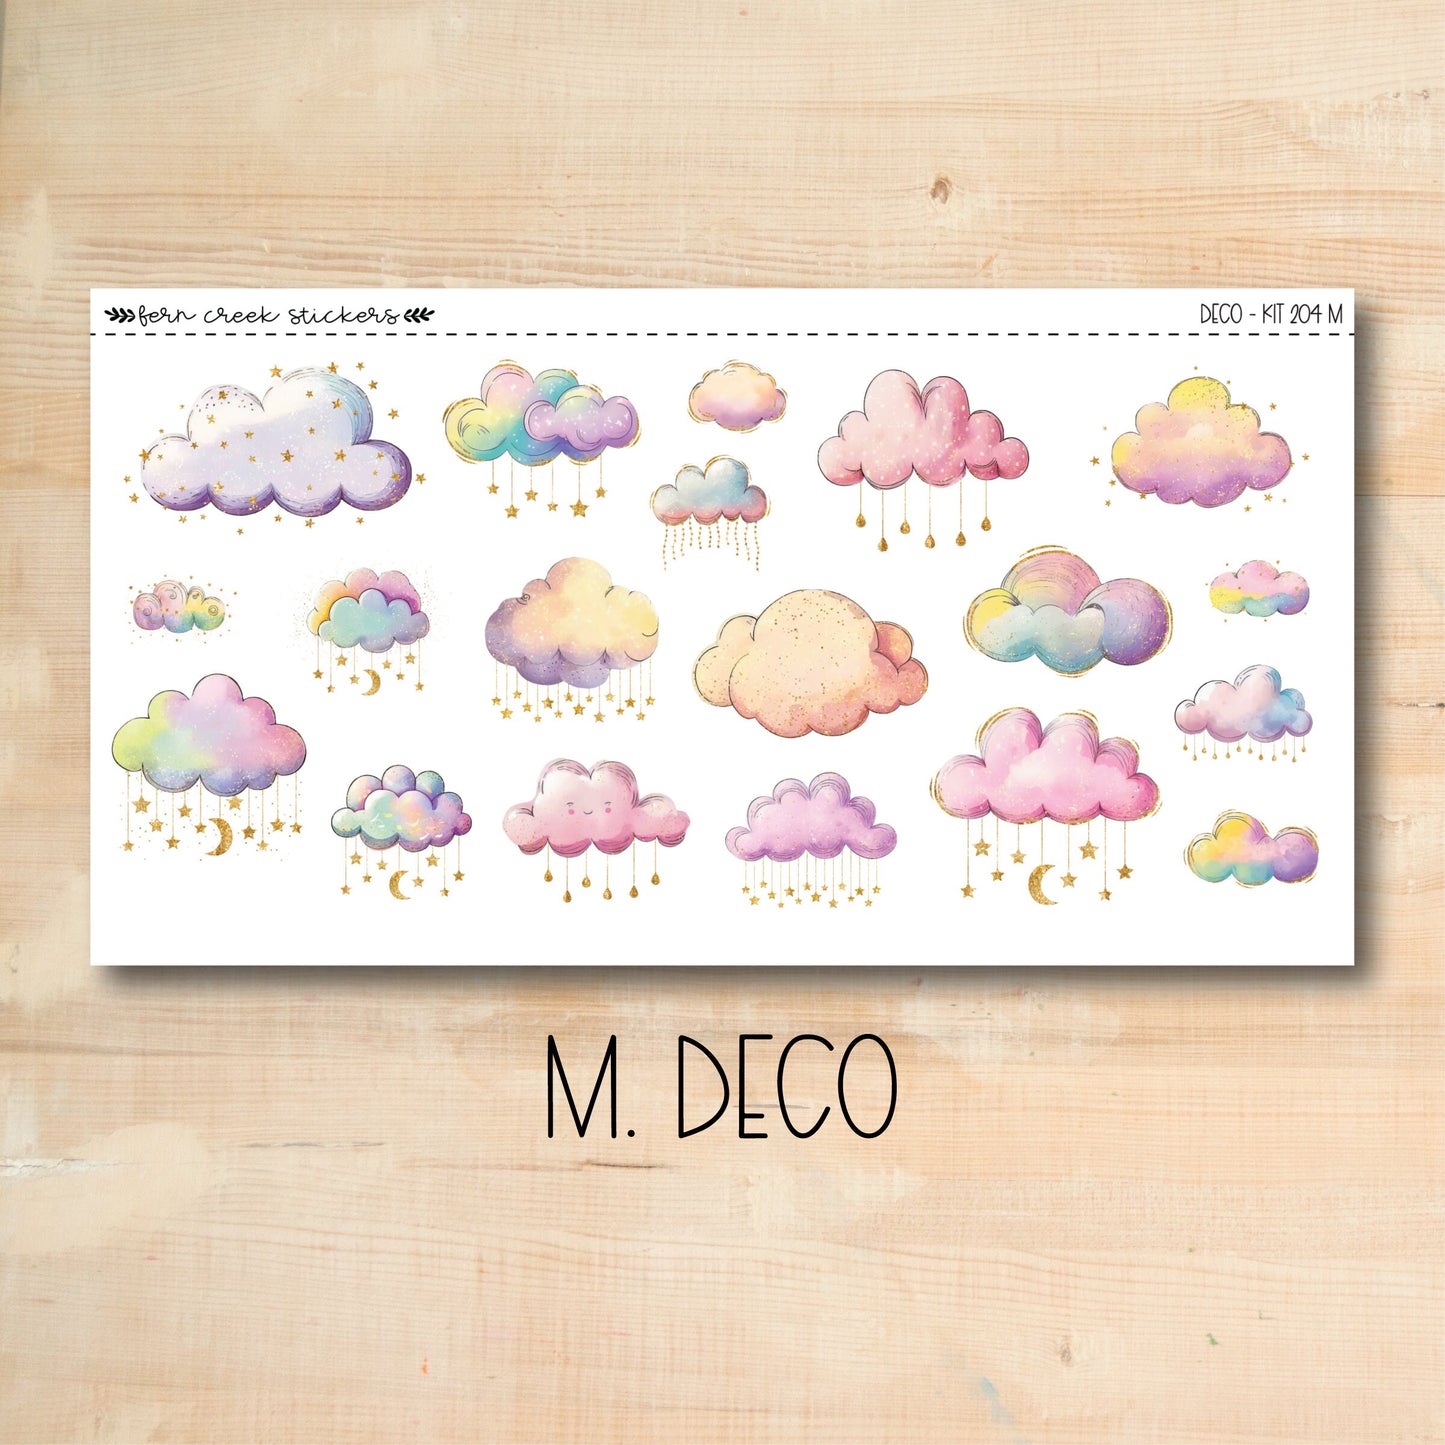 a sticker of clouds and rain on a wooden surface